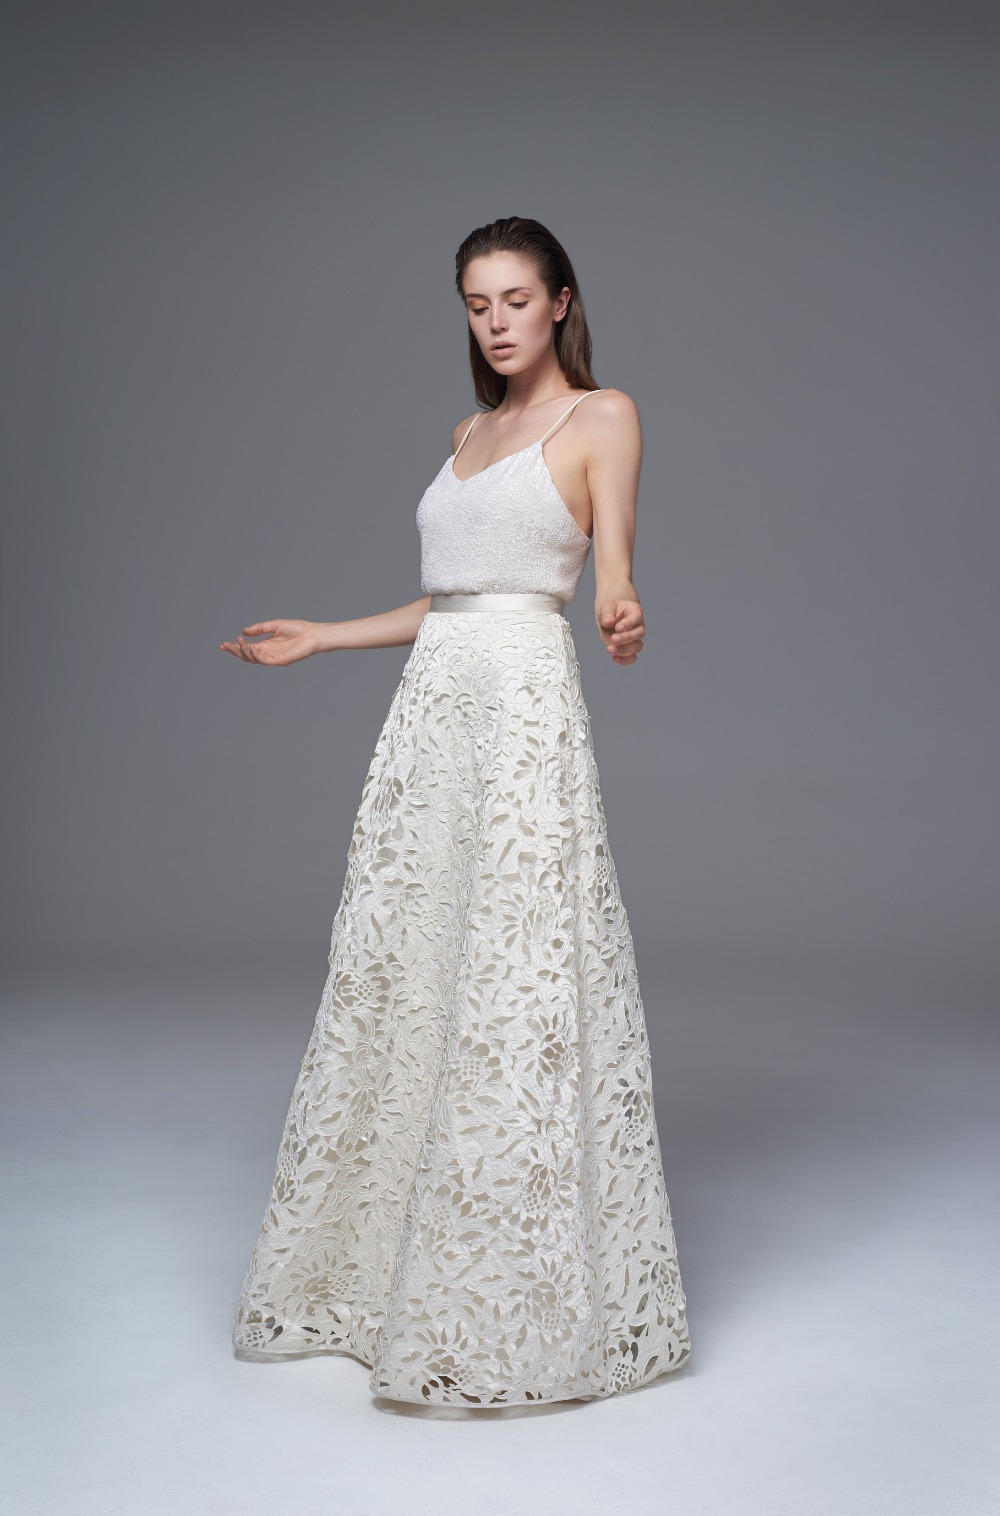 ISOBEL SKIRT CELINE CAMI  FRONT from the Halfpenny Bridal Collection